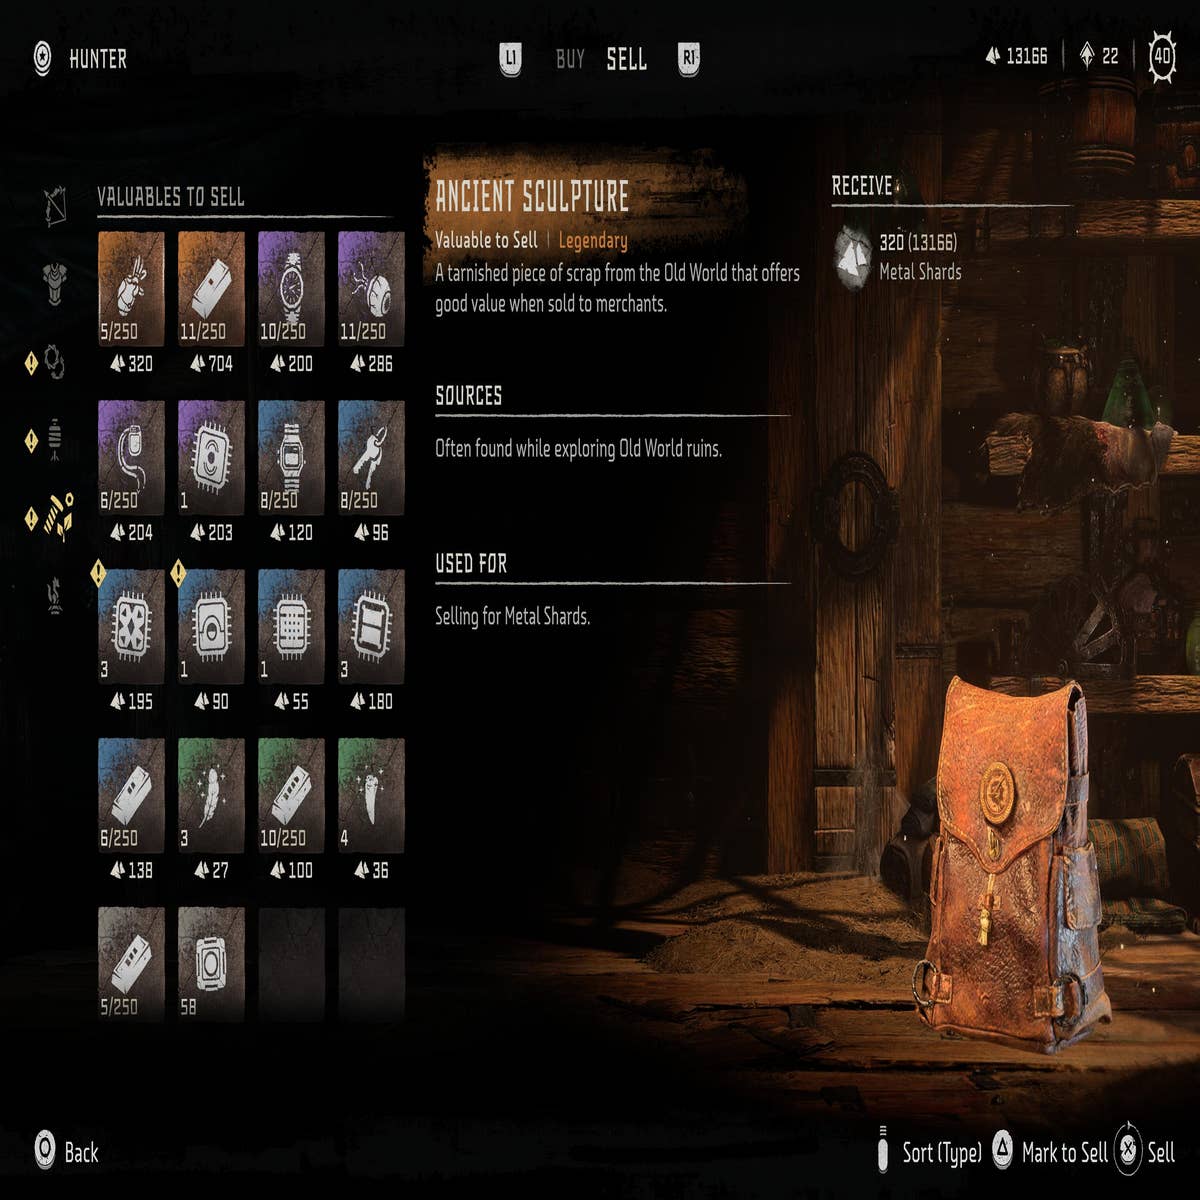 What items are safe to sell in Horizon Forbidden West?